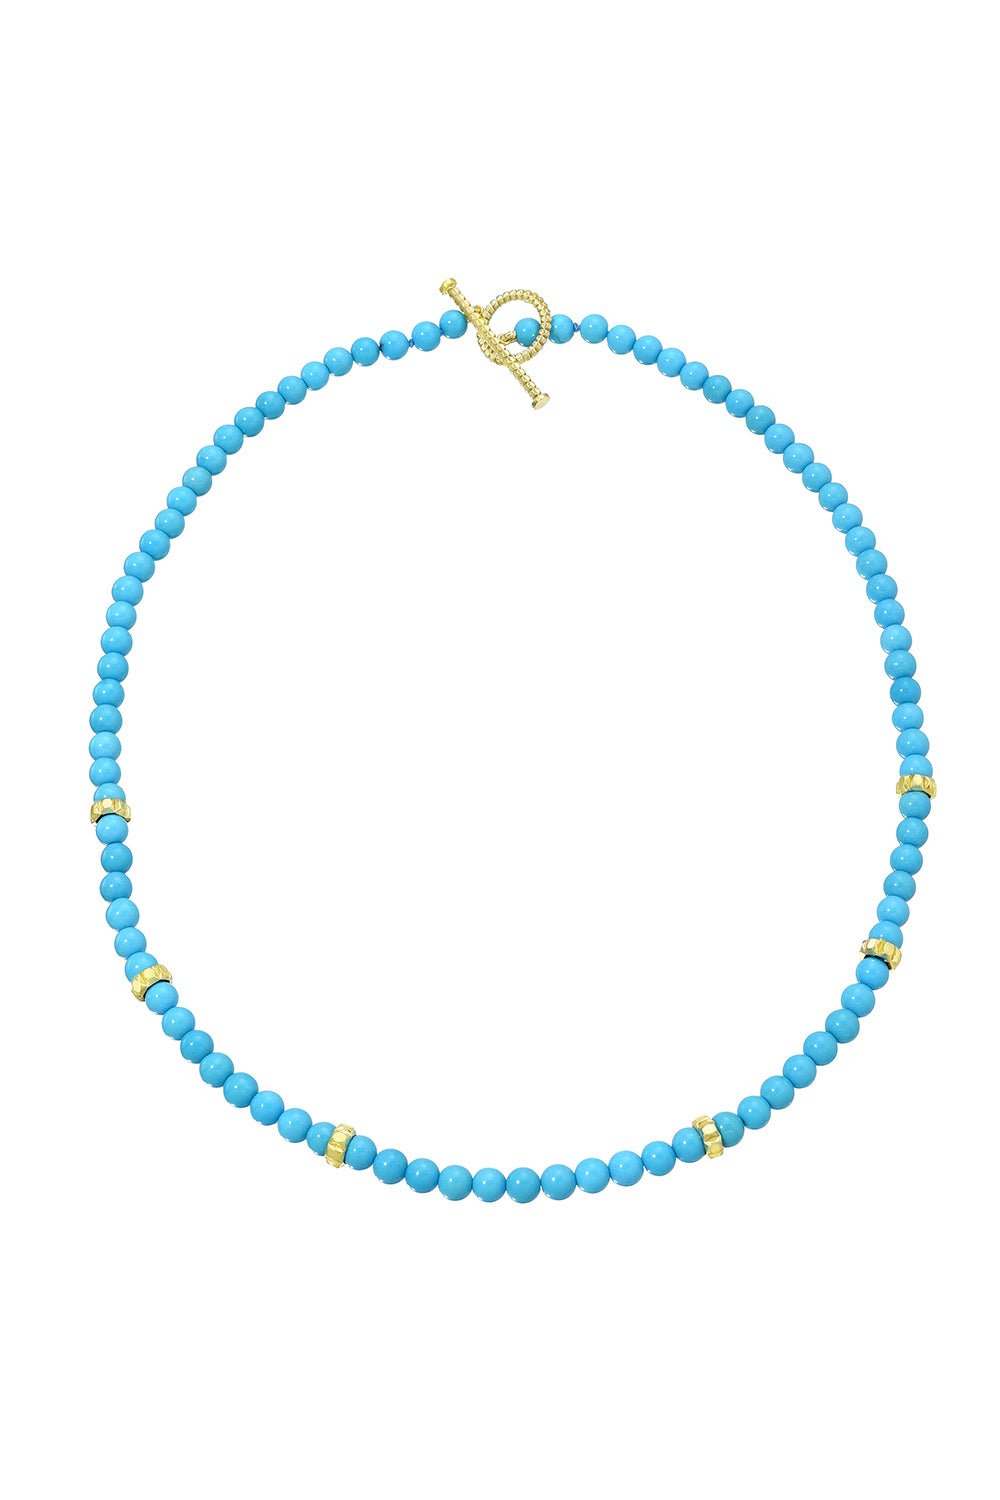 MEREDITH YOUNG-Sleeping Beauty Bead Necklace-YELLOW GOLD